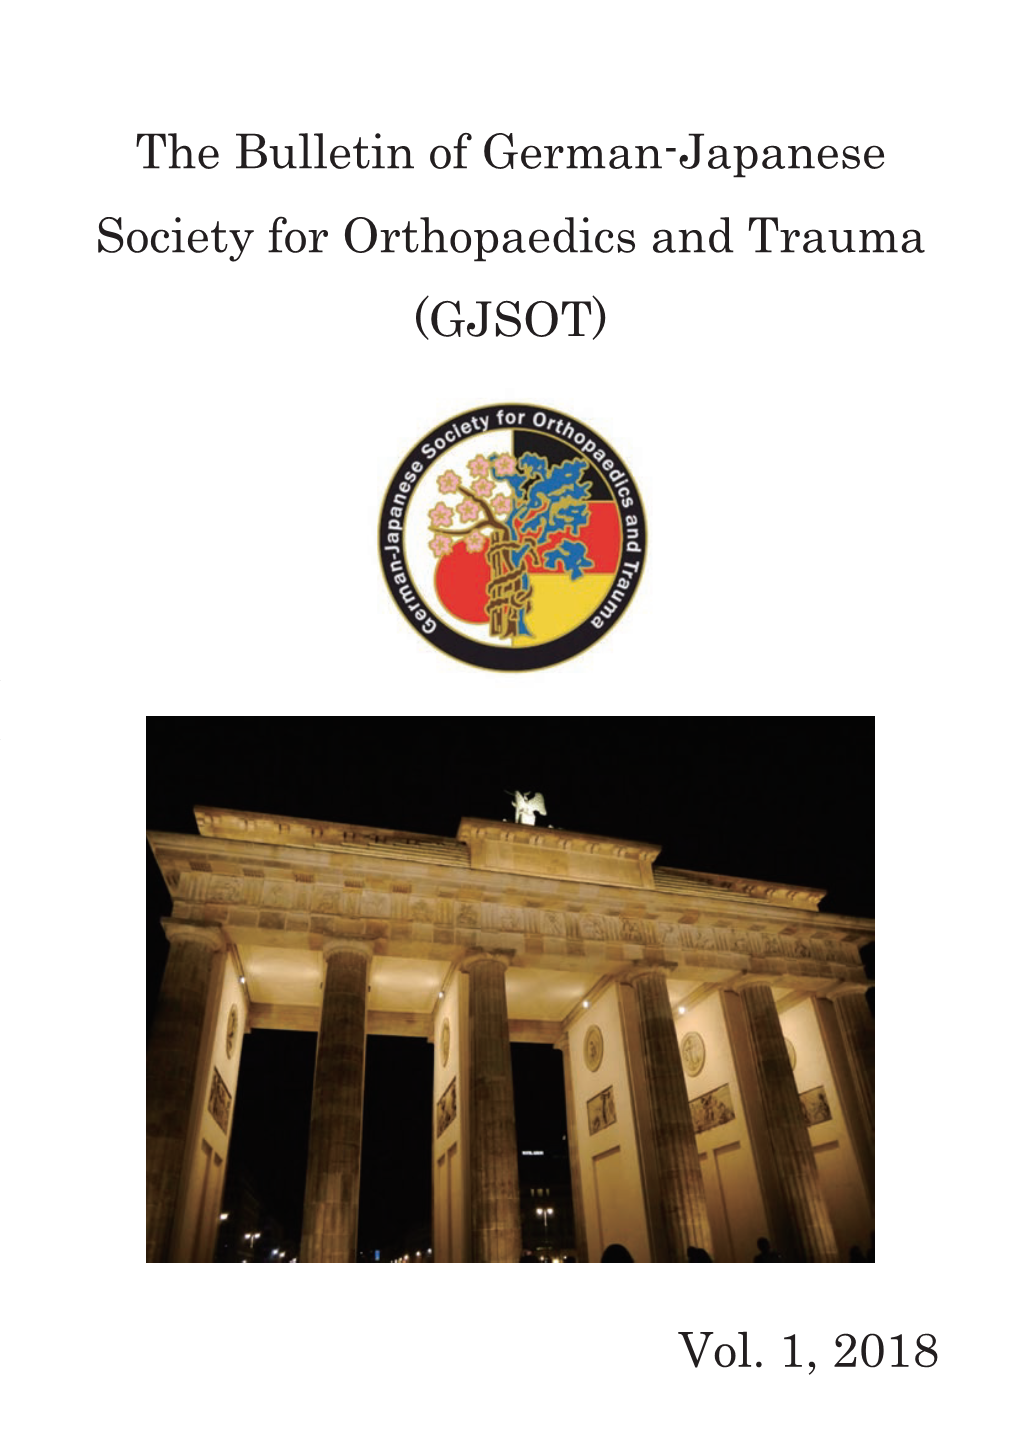 The Bulletin of German-Japanese Society for Orthopaedics and Trauma (GJSOT) Vol. 1, 2018